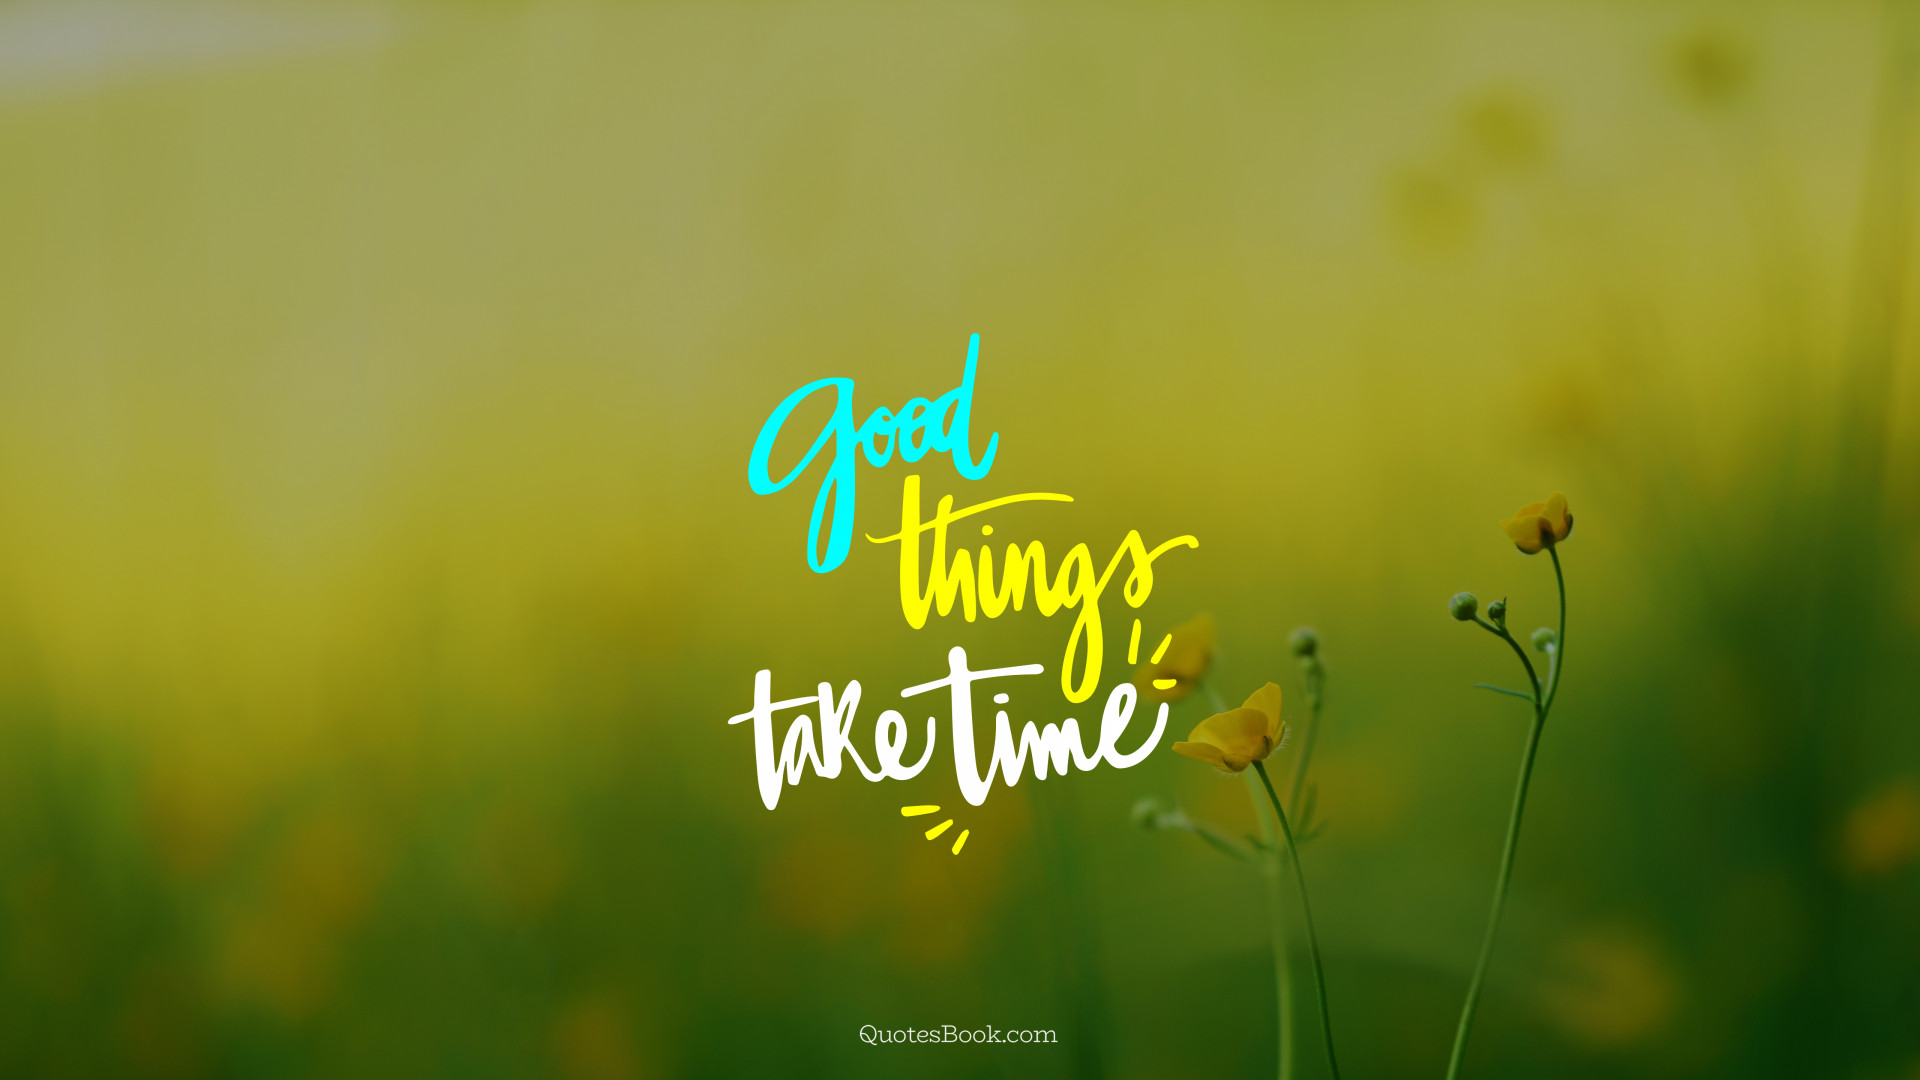 Good things take time - Page 4 - QuotesBook